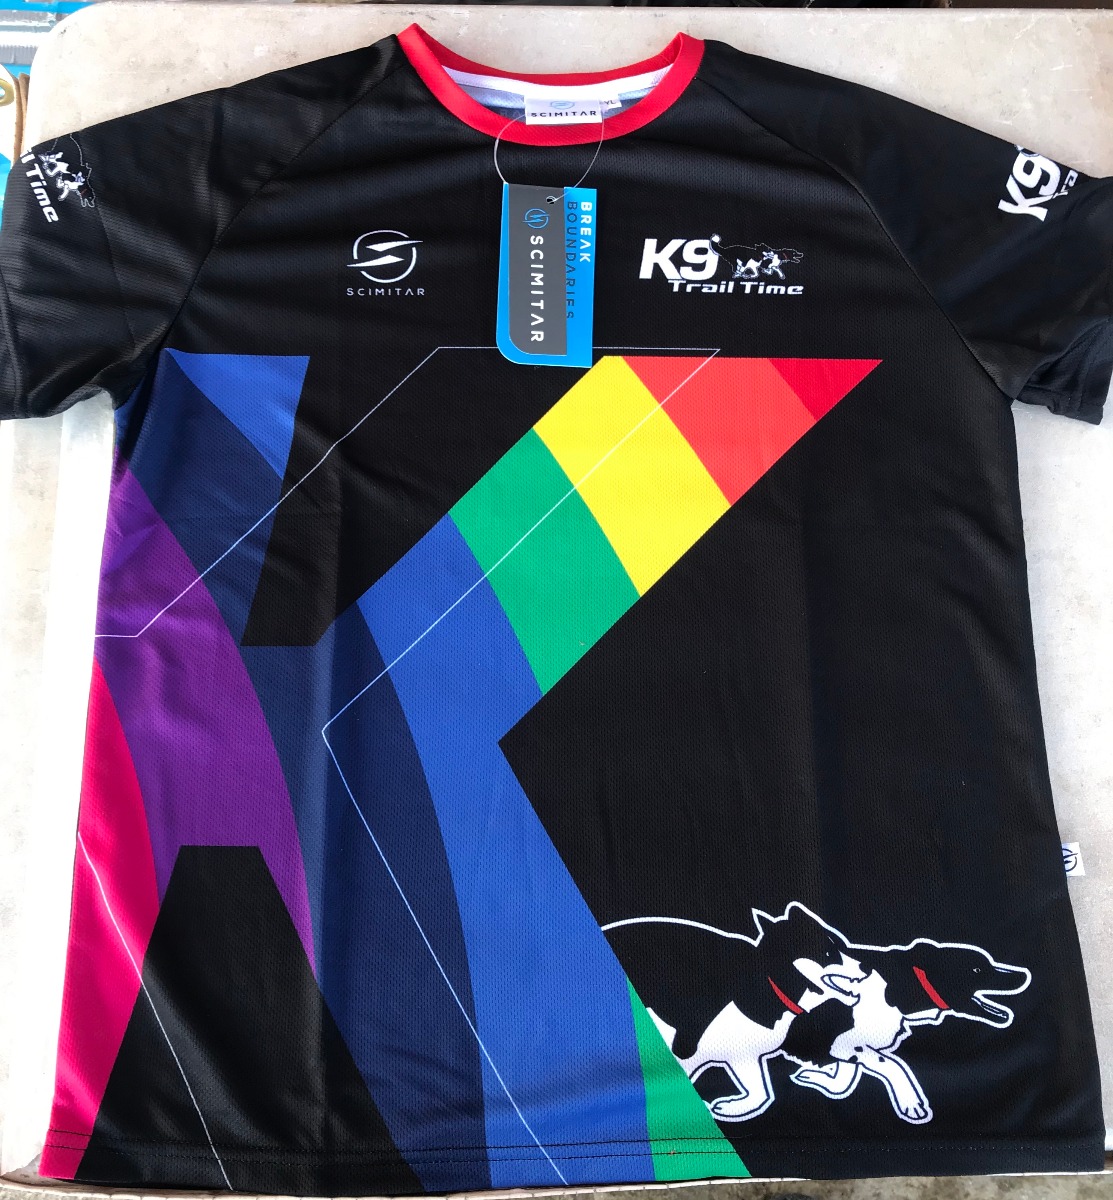 K9 Trail Time Rainbow Technical T-Shirt available in a wide range of sizes designed by Scimitar Sports and can be used for running, biking, walking and any general leisure activity.